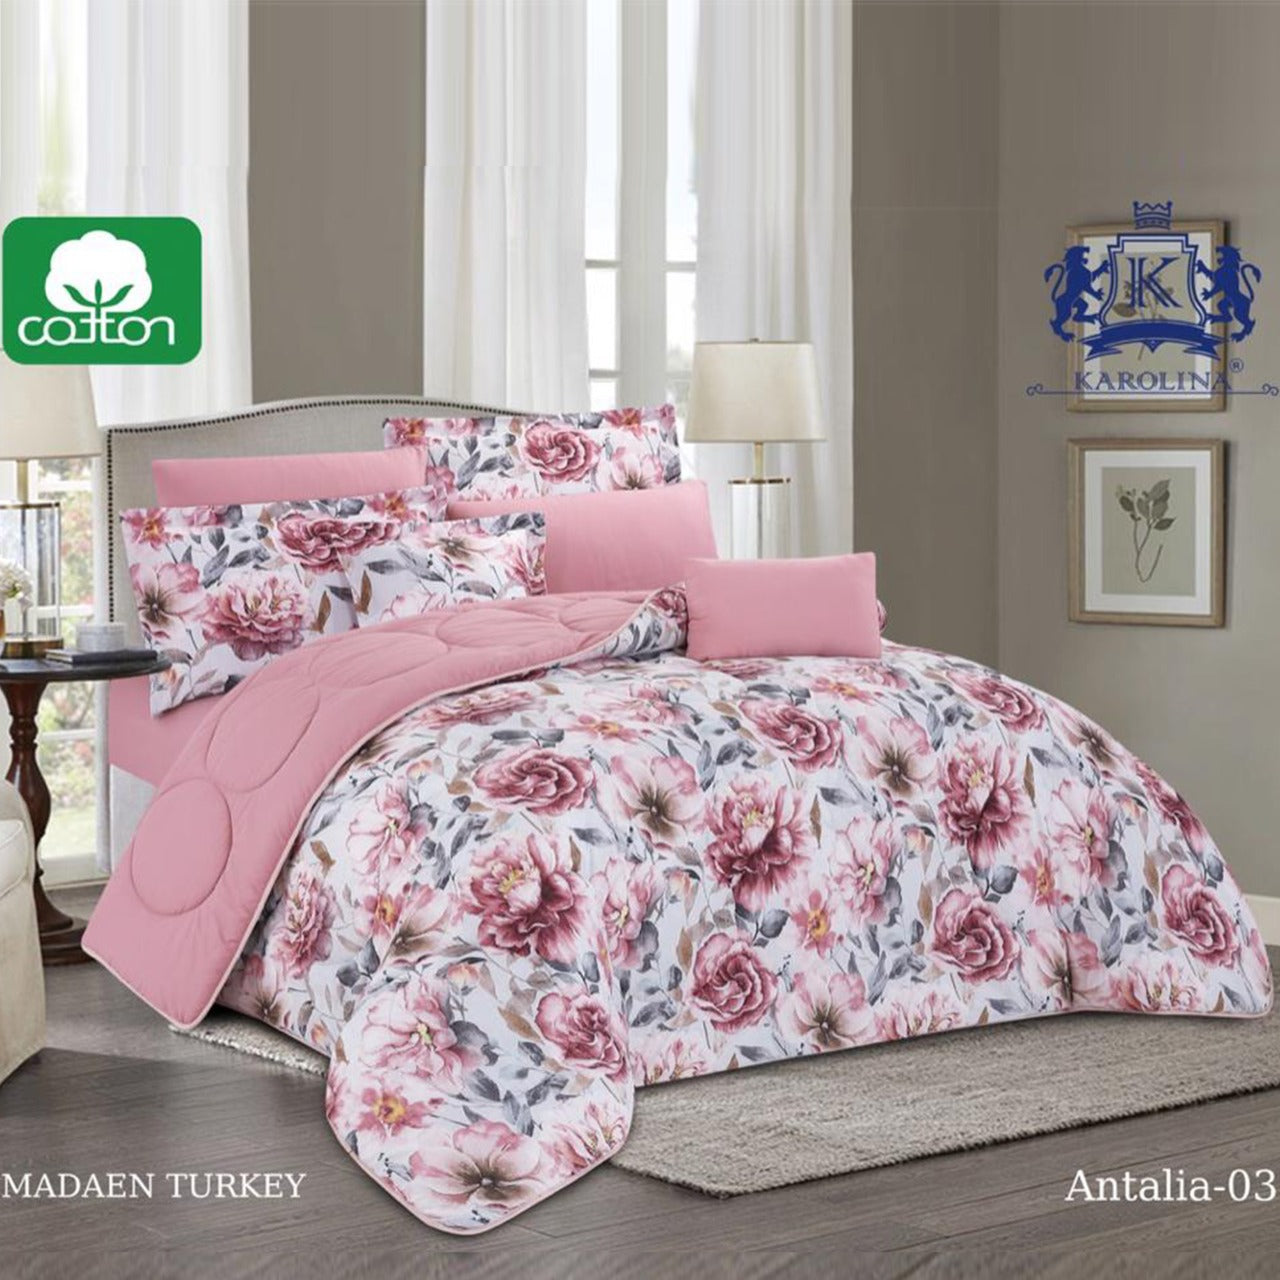 10 Piece Comforter Bedding With Sheet and Decorative Pillow Shams | Made in Turkey Antalia-03 Zaappy